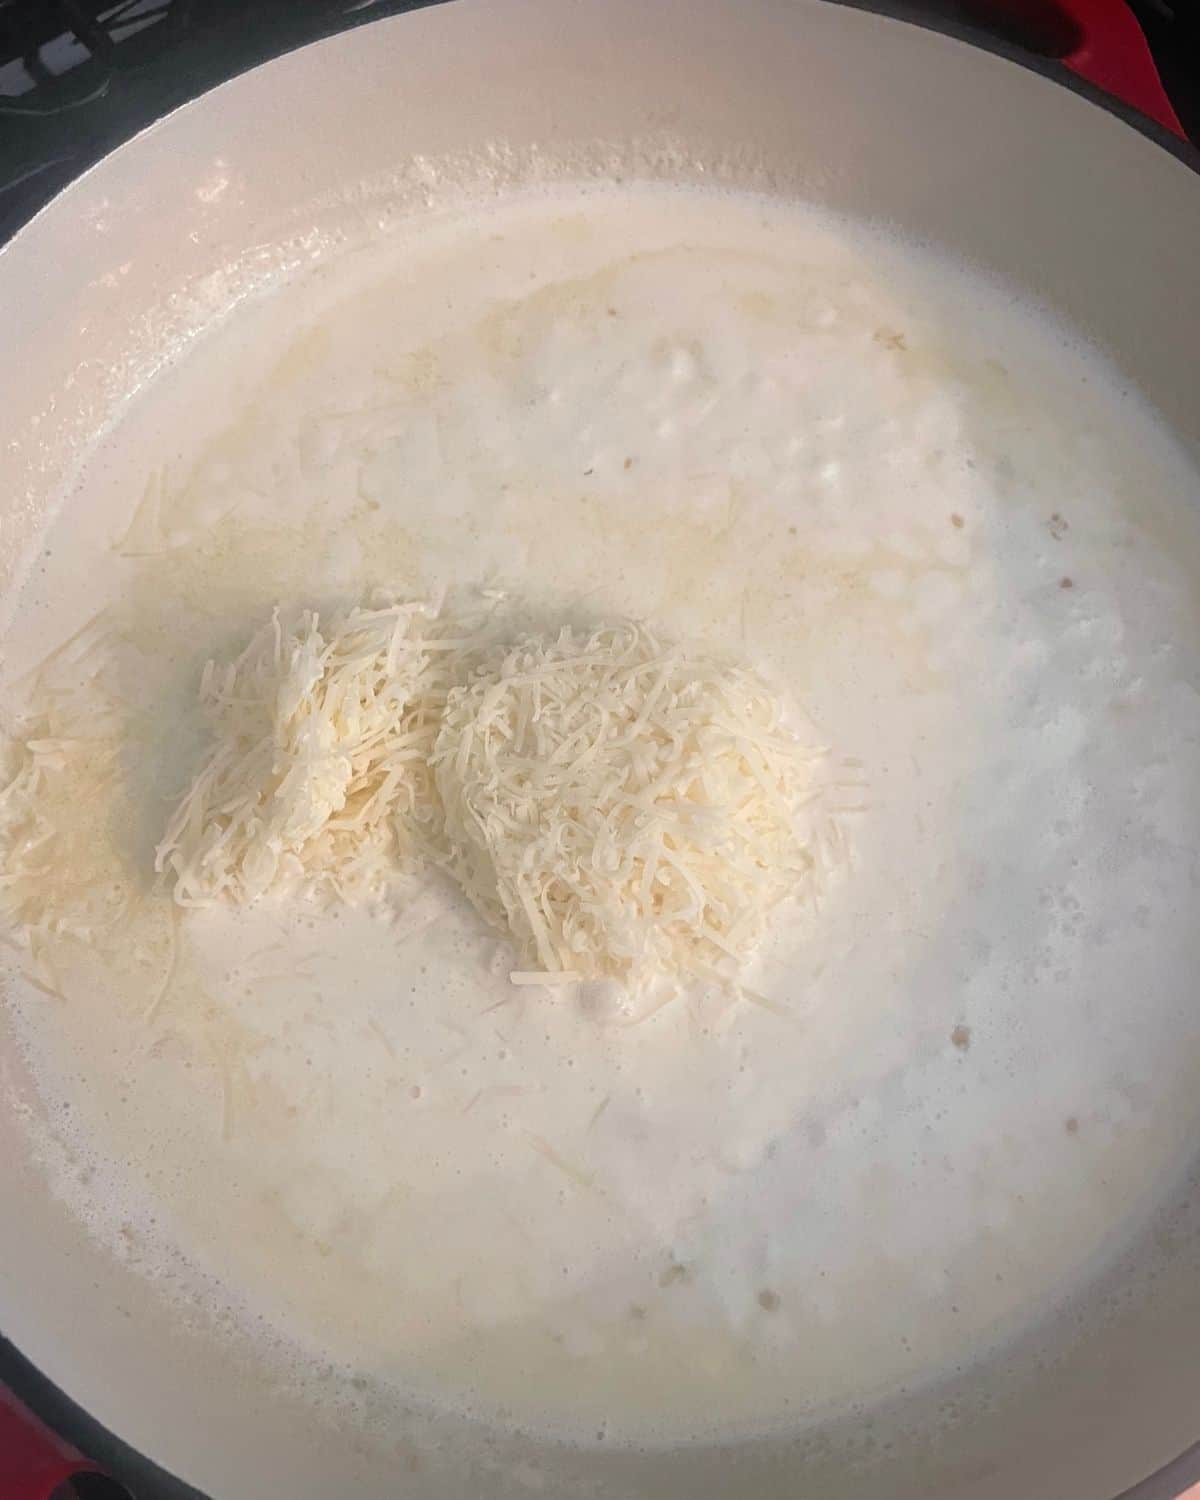 Shredded parmesan cheese added to the heavy cream, white wine, butter, and garlic.